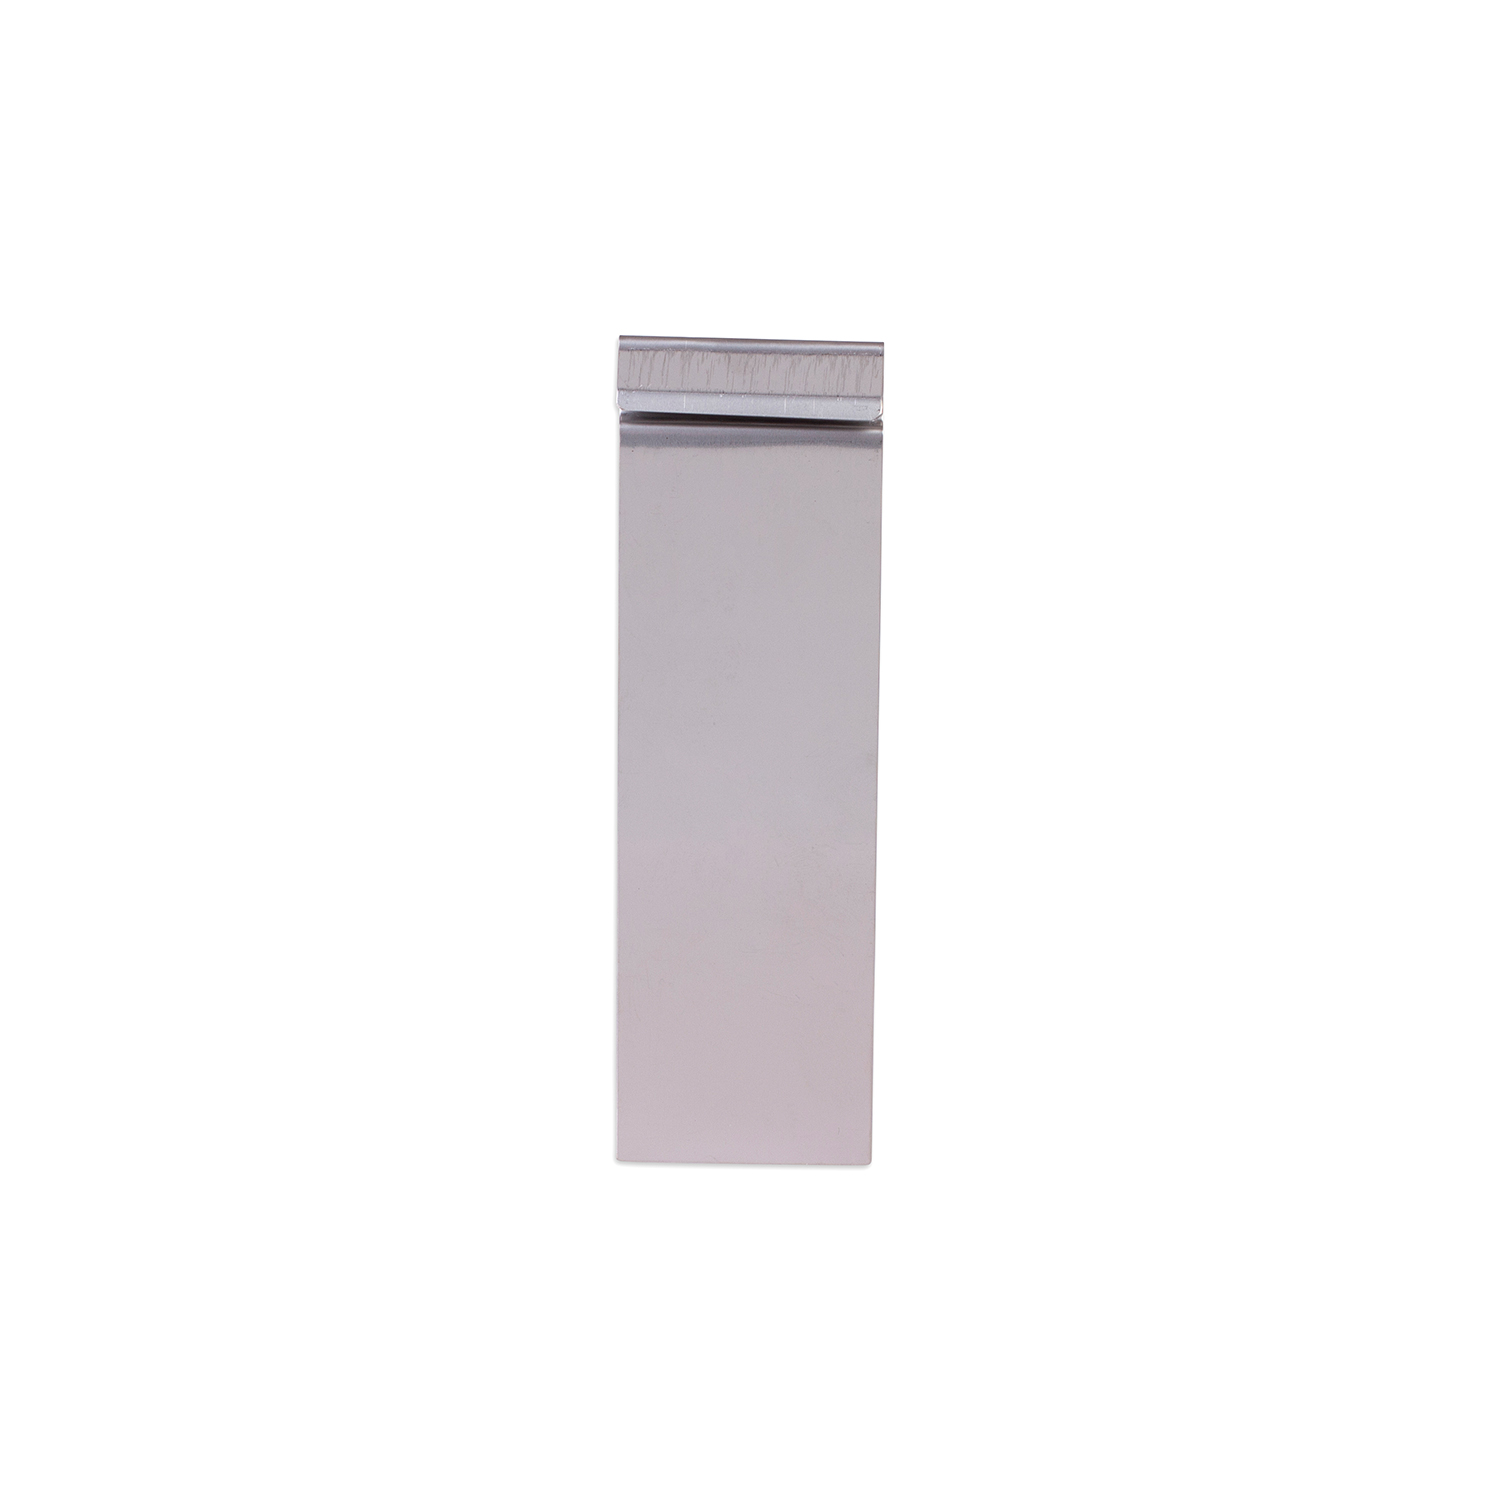 Stainless steel anode, 150 x 50 x 0.5 mm